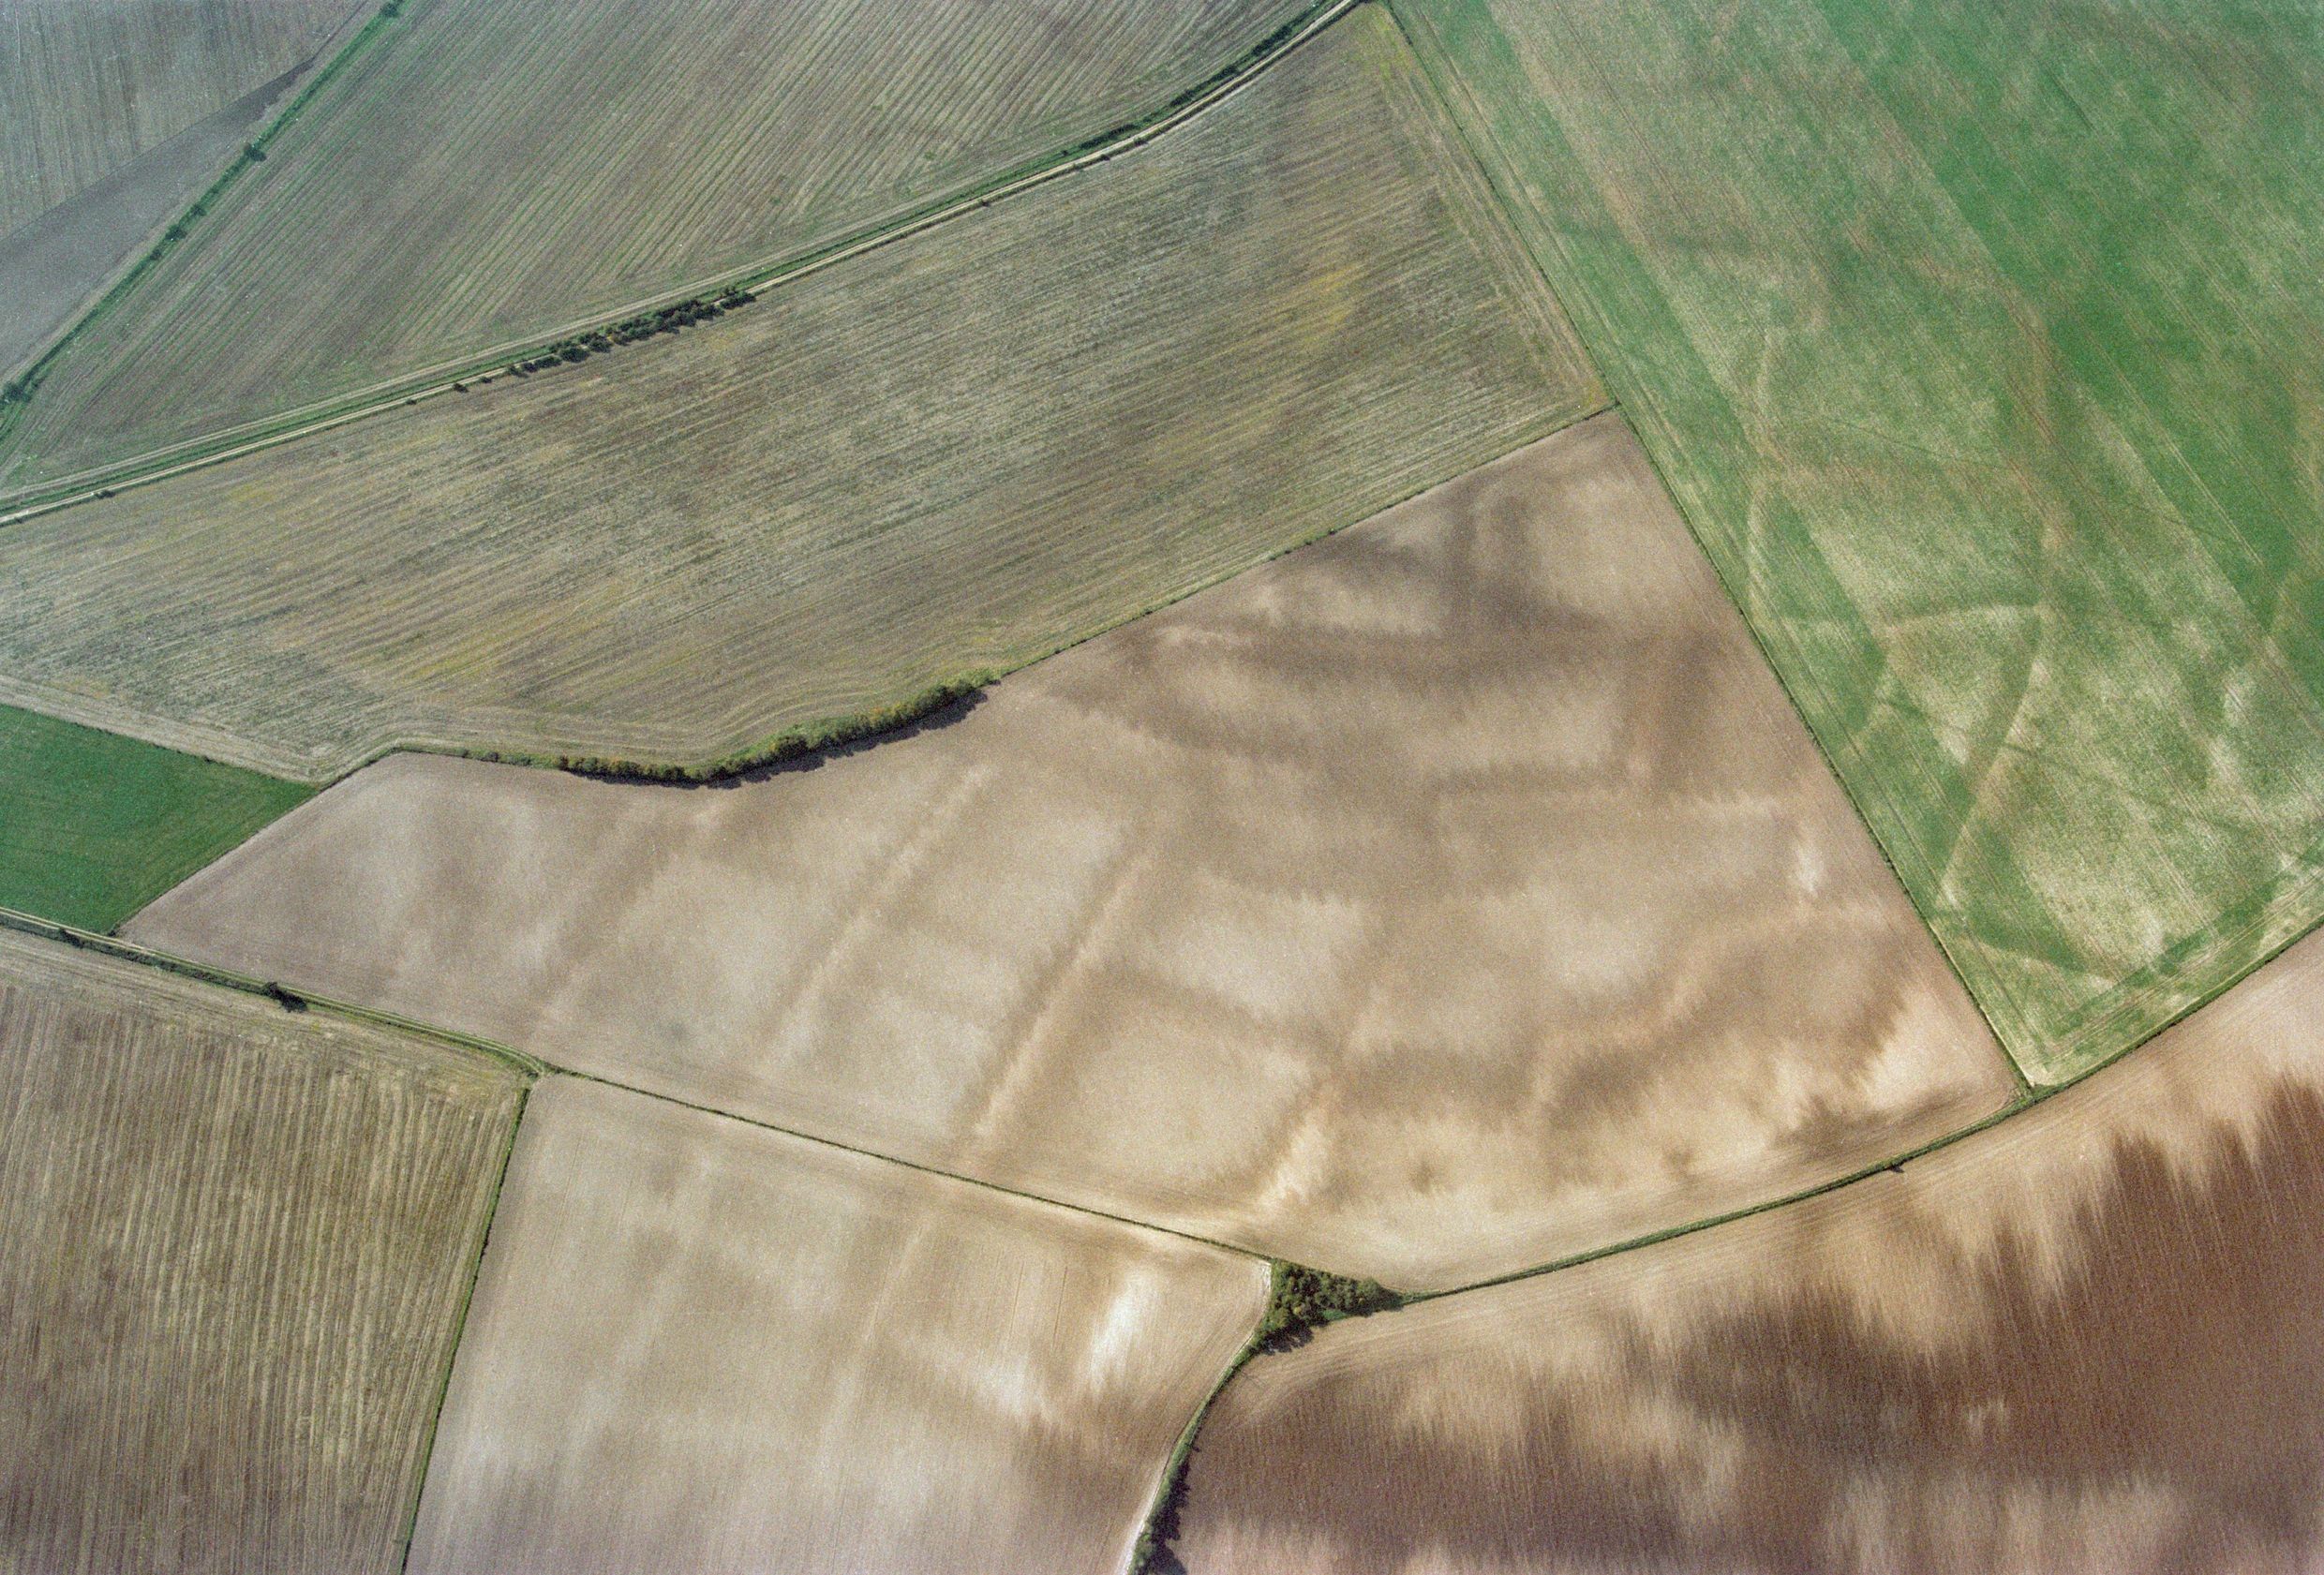 Image of buried archaeology in rural fields visible from aerial photographs